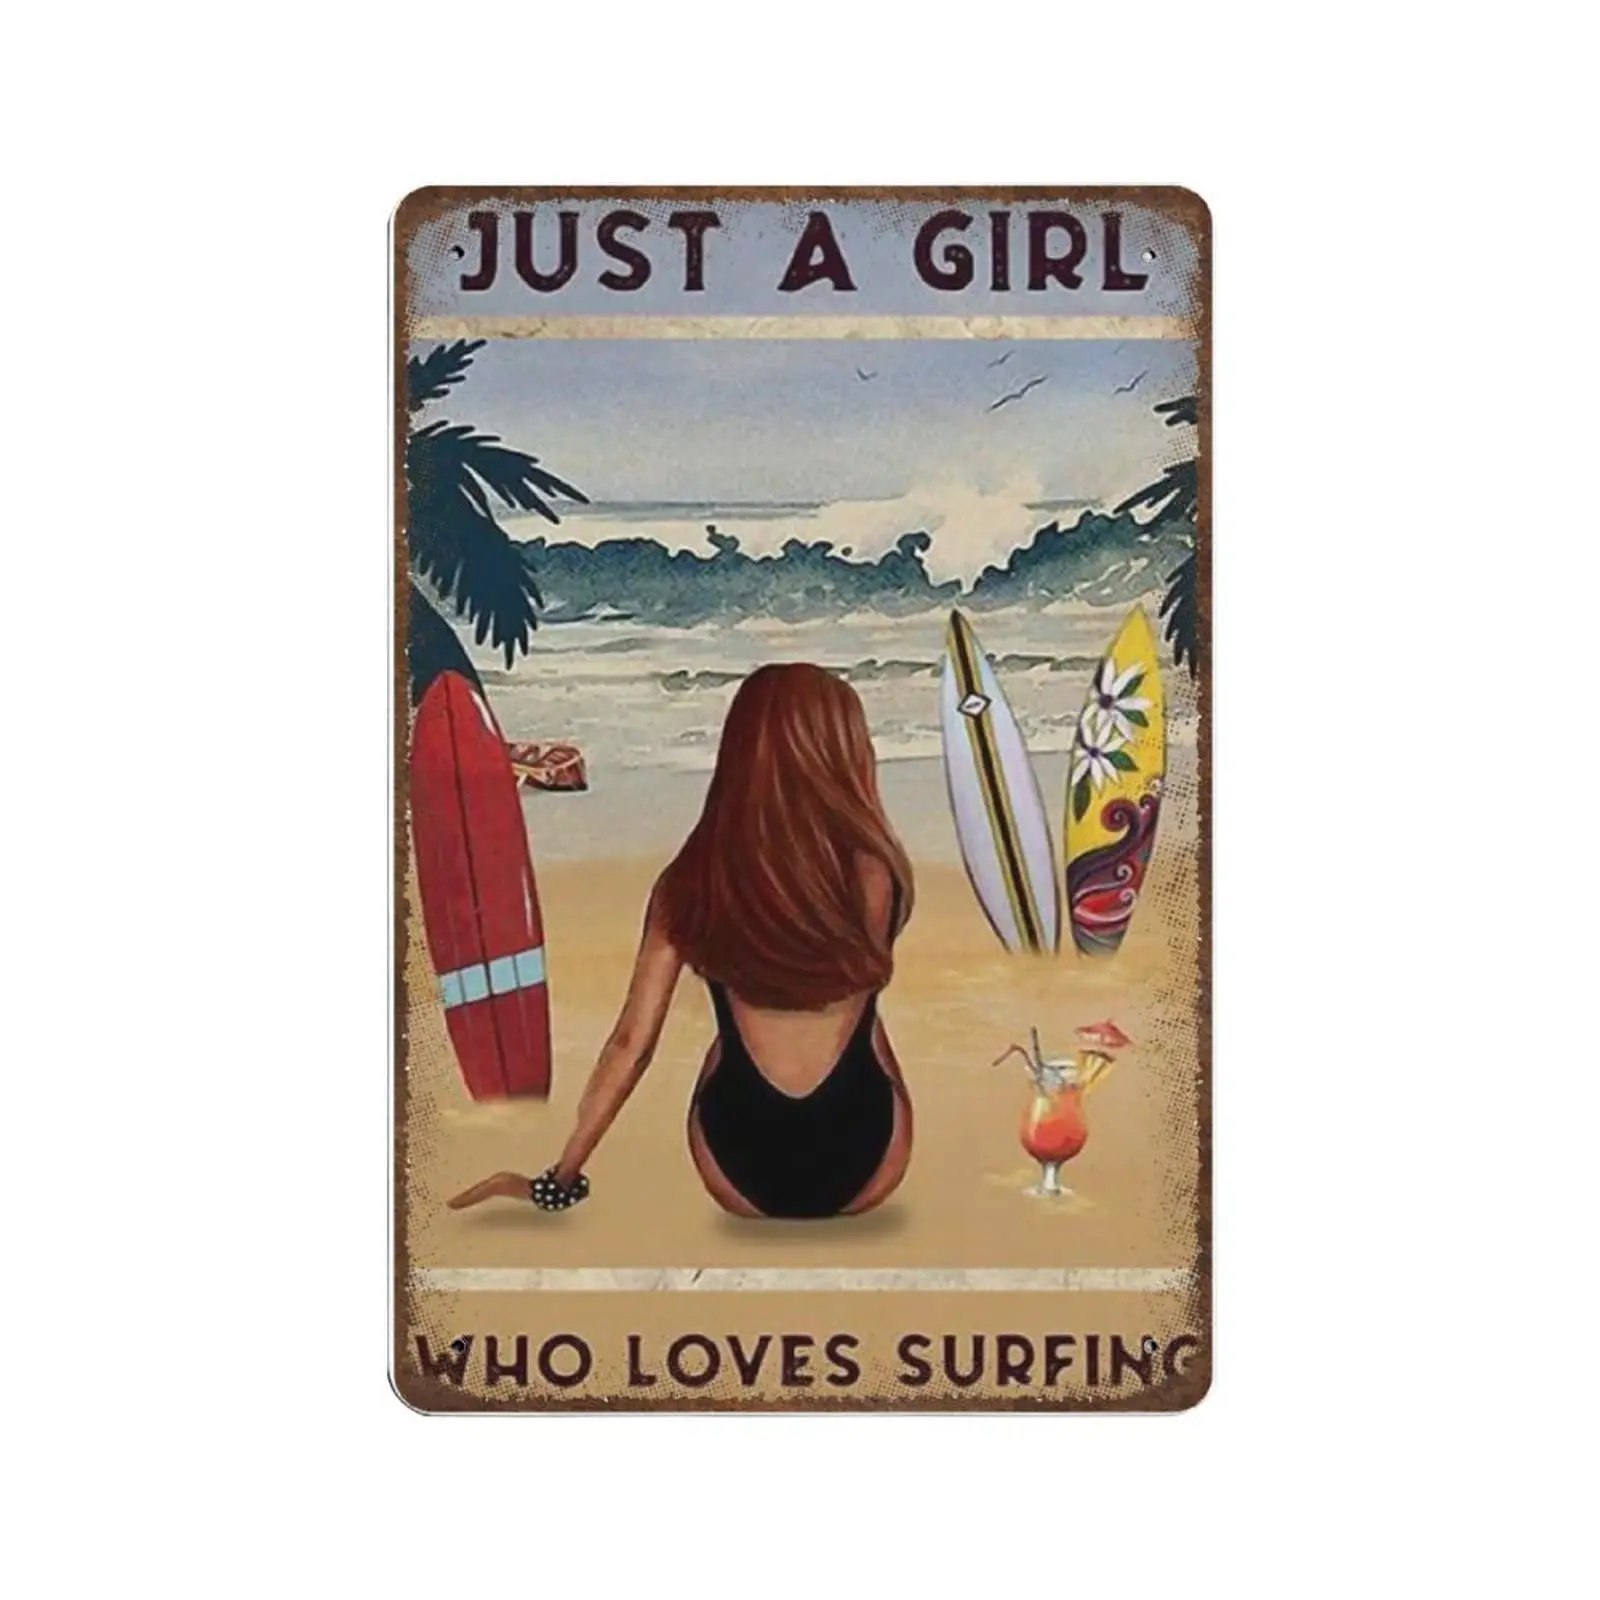 

Retro Thick Metal Tin Sign-Just A Girl Who Loves Surfing Sign -Novelty Posters，Home Decor Wall Art，Funny Signs for Home/Kitchen/